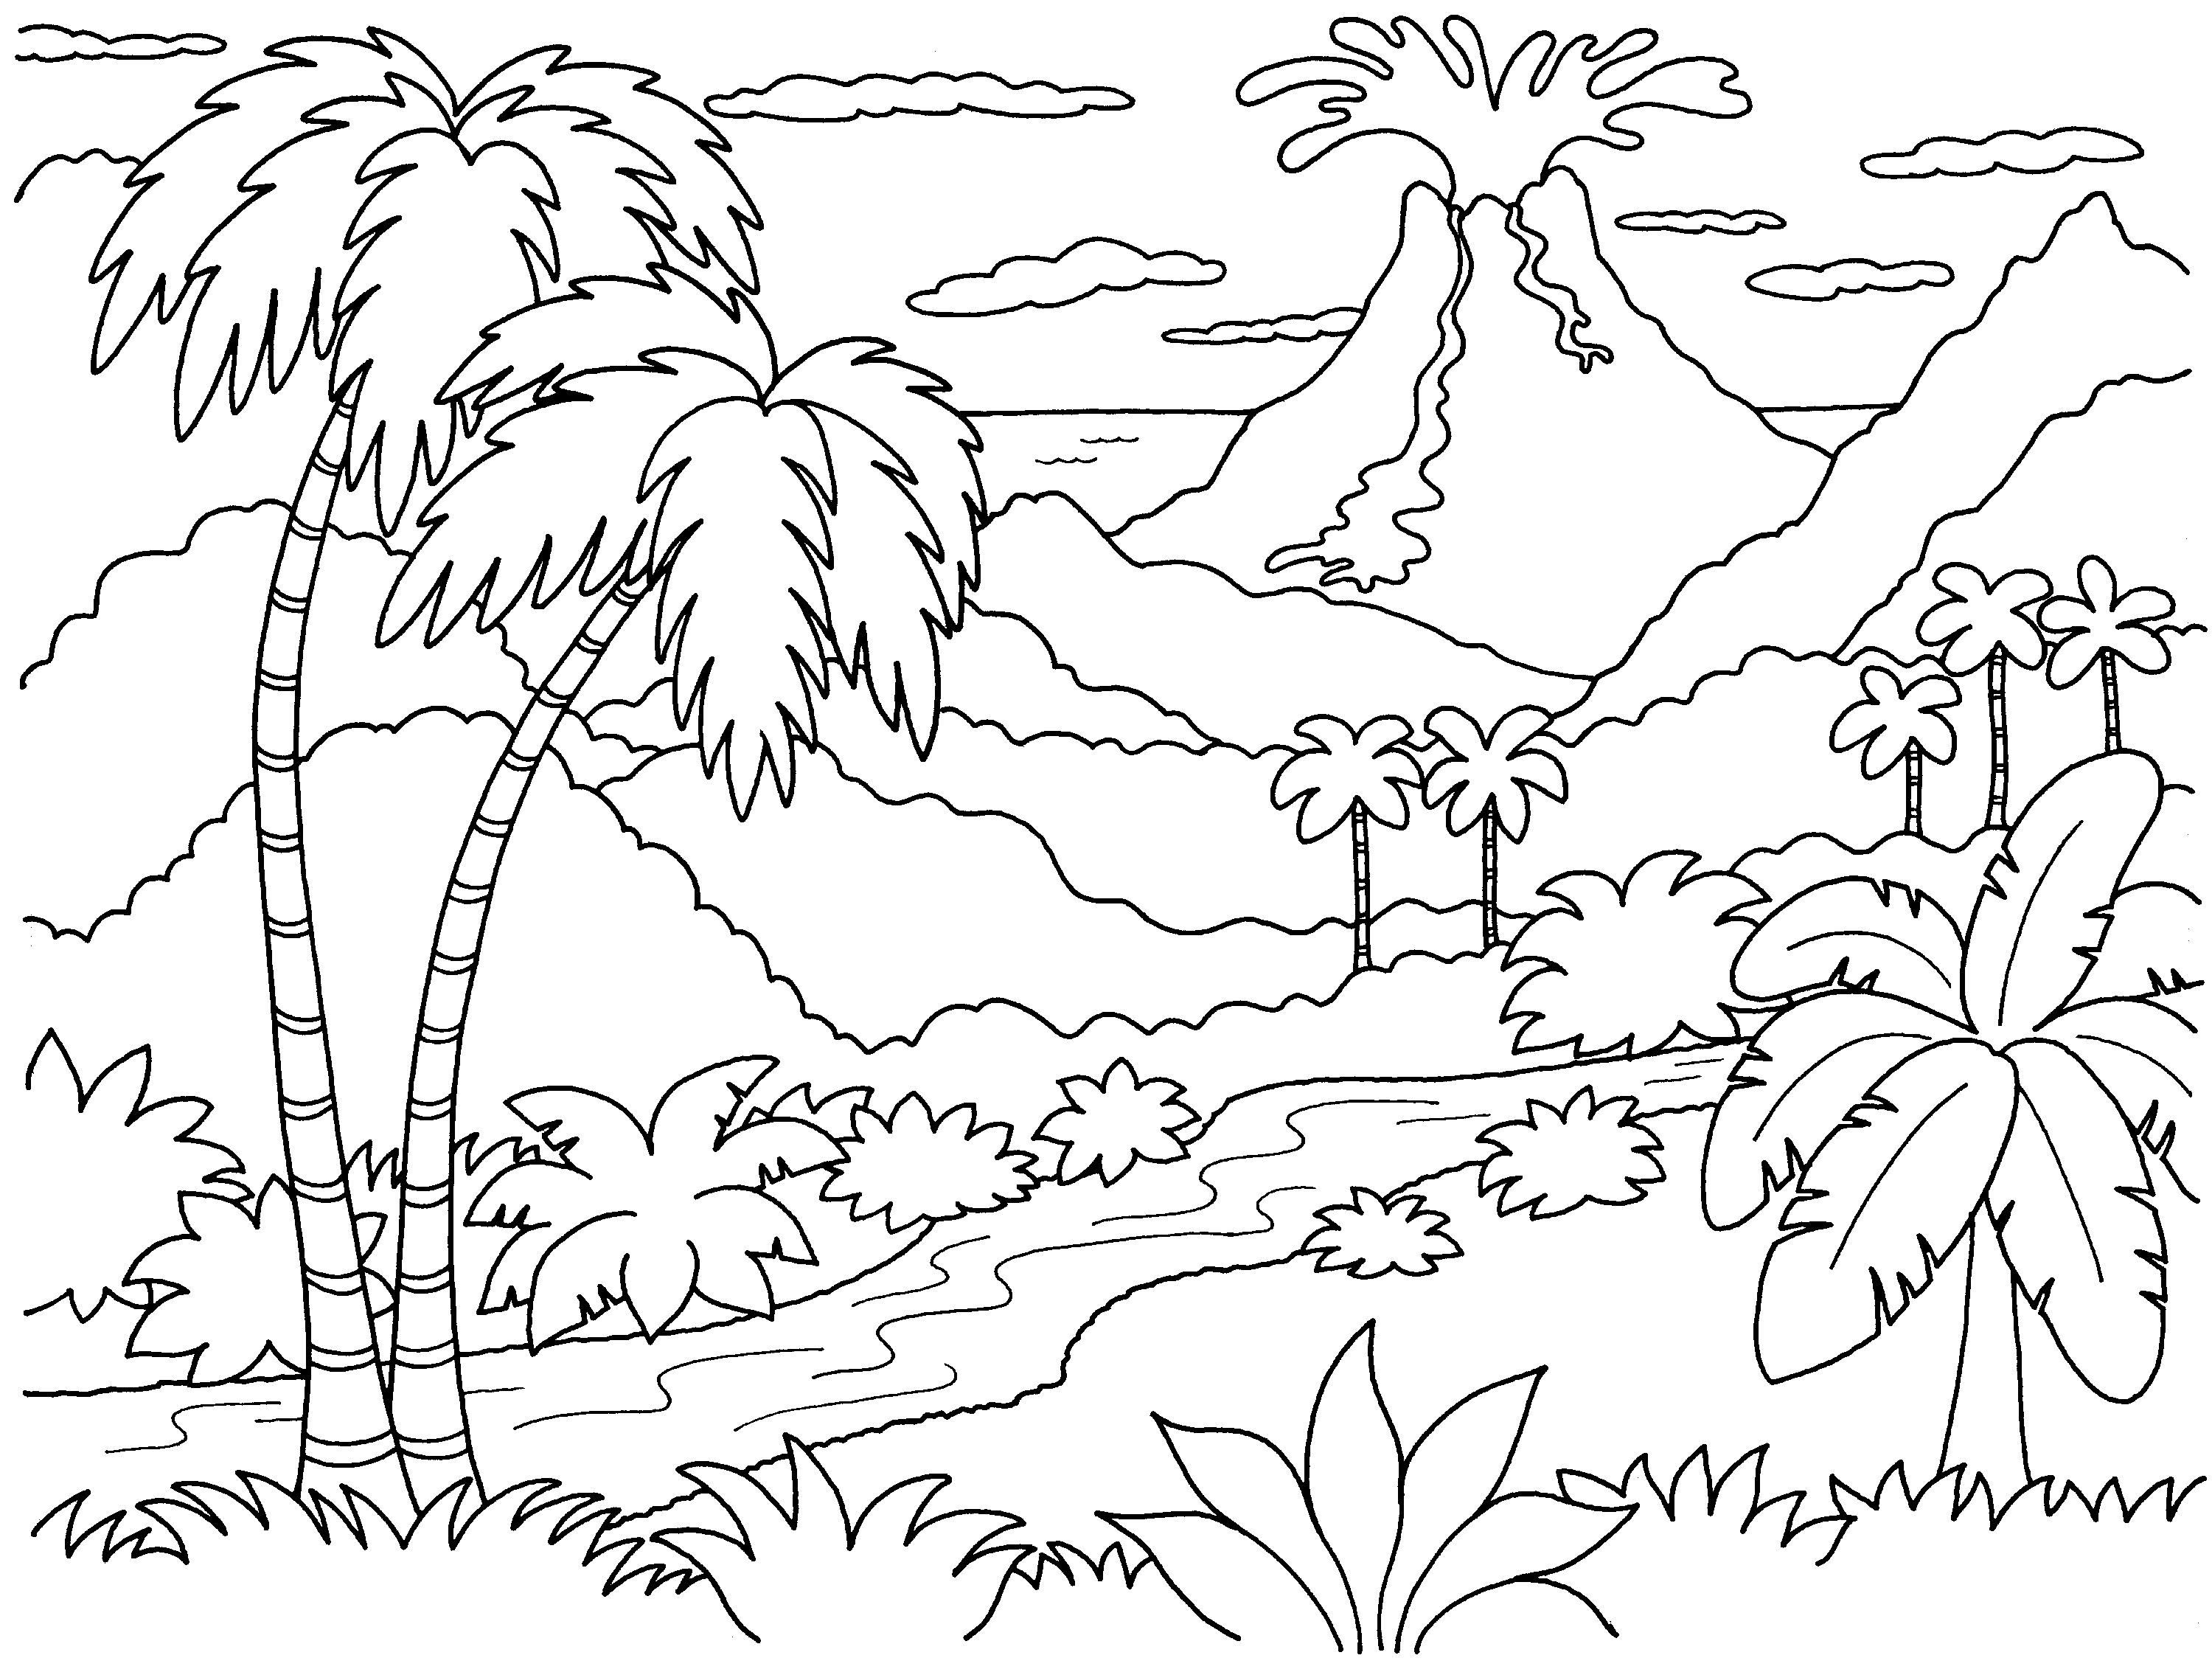  Nature Island Coloring Pages | Print Coloring pages